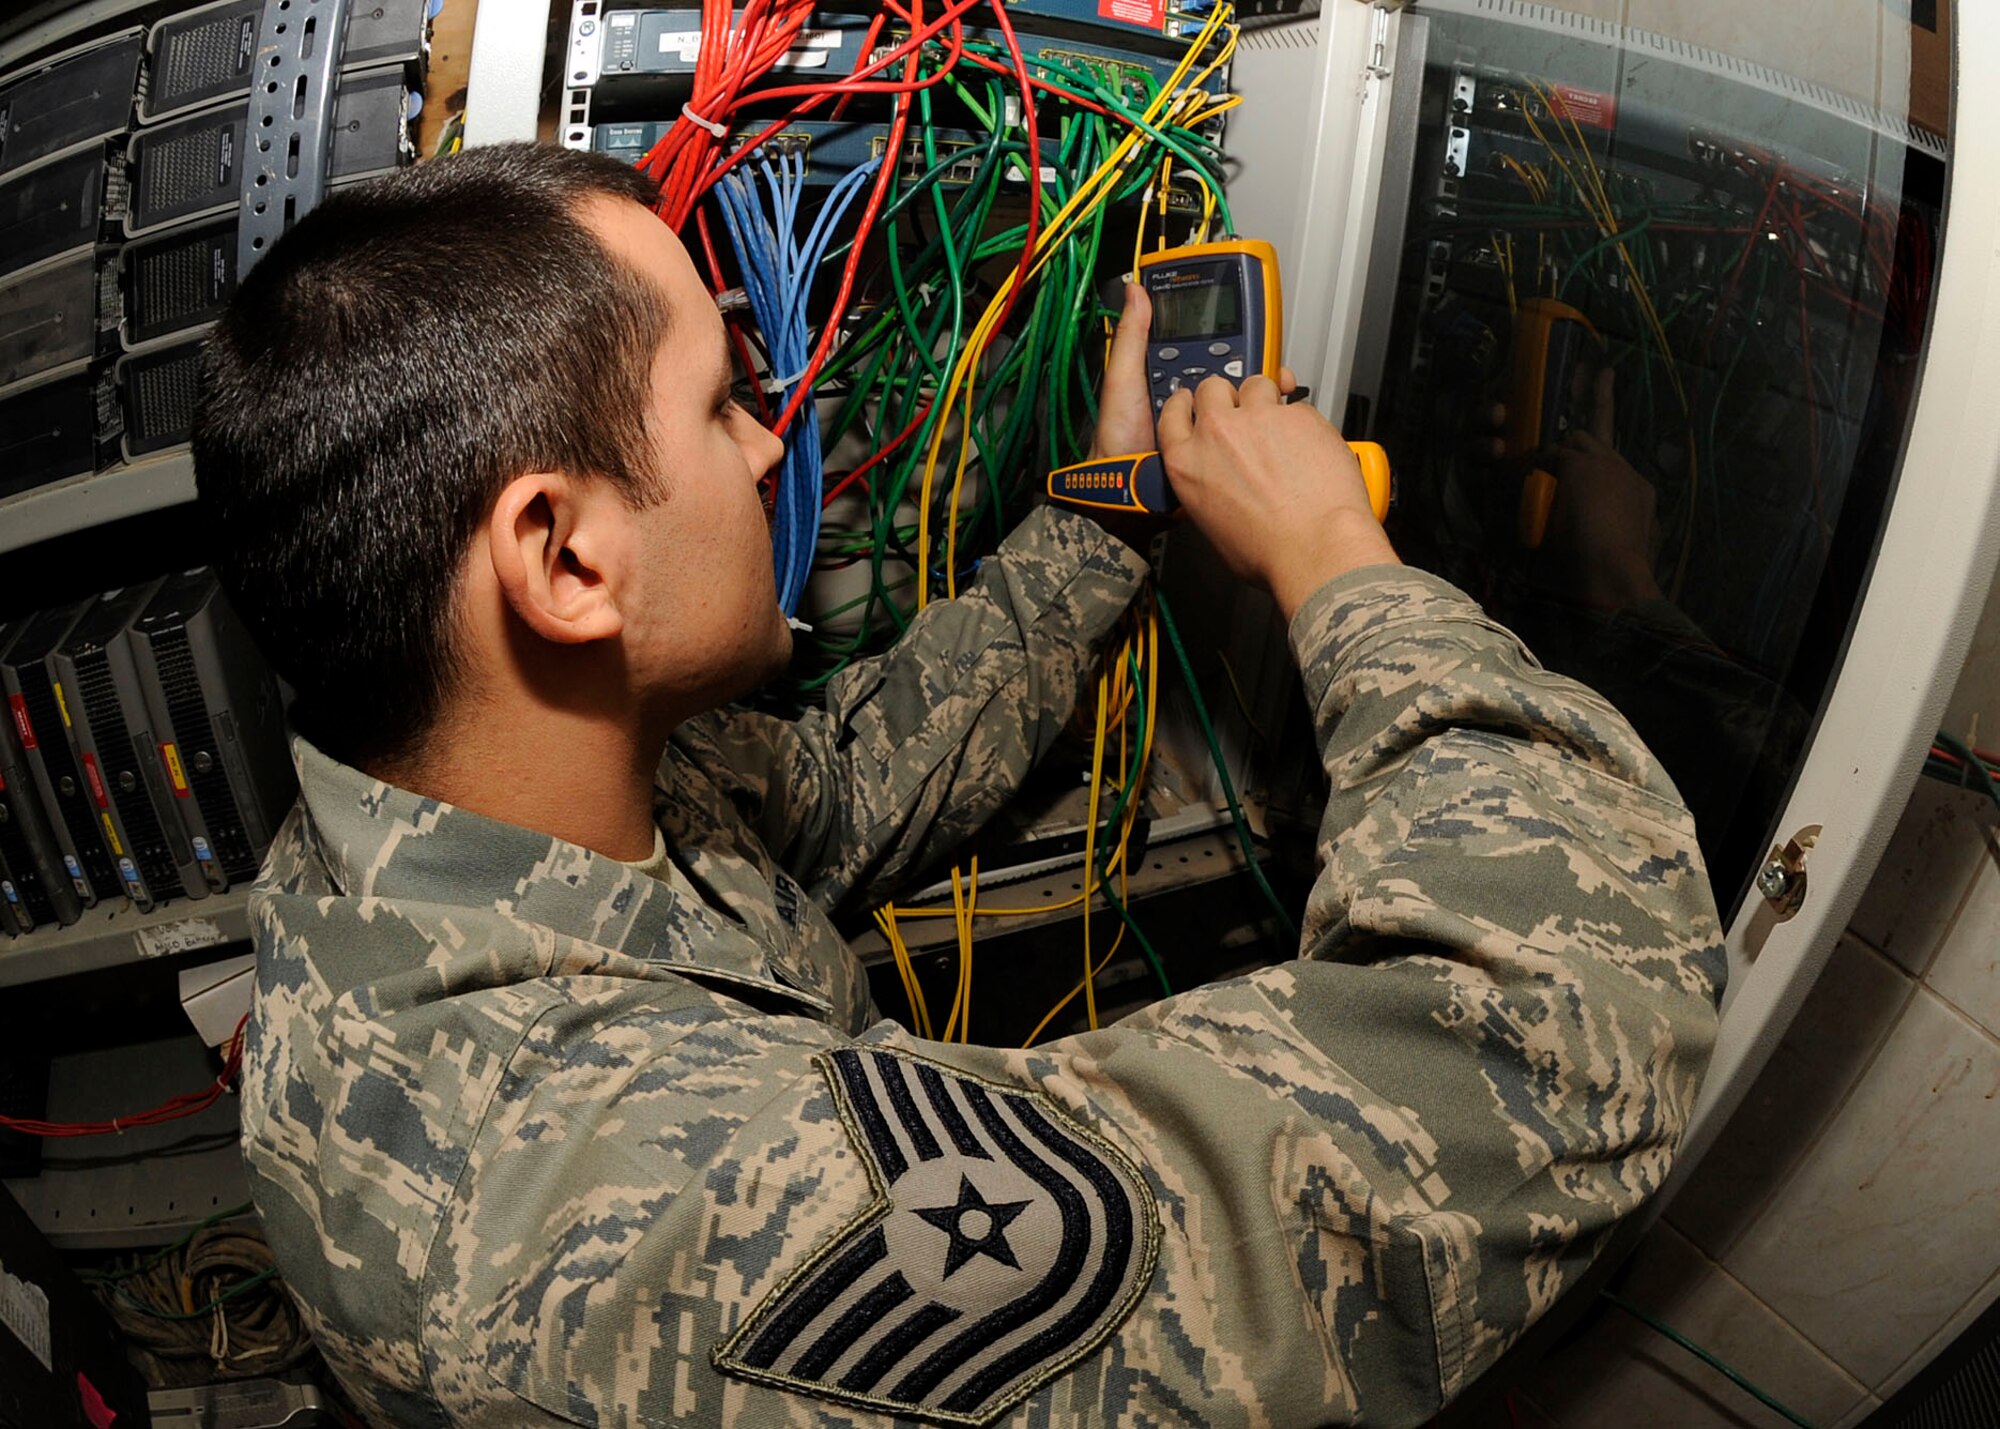 Tech. Sgt. Matthew Reyes, NCIOC of J6 Task Force 134, uses a flute tester and a toner kit to test the connectivity of the network at their facility at Camp Liberty, Iraq April 1, 2009. Sergeant Reyes is a member of Task Force 134 which is responsible for all Iraqi detainee operations throughout Iraq. Sergeant Reyes is deployed from Edwards AFB, Calif., and a native of Sacramento, Calif. (U.S. Air Force photo by Senior Airman Jacqueline Romero)